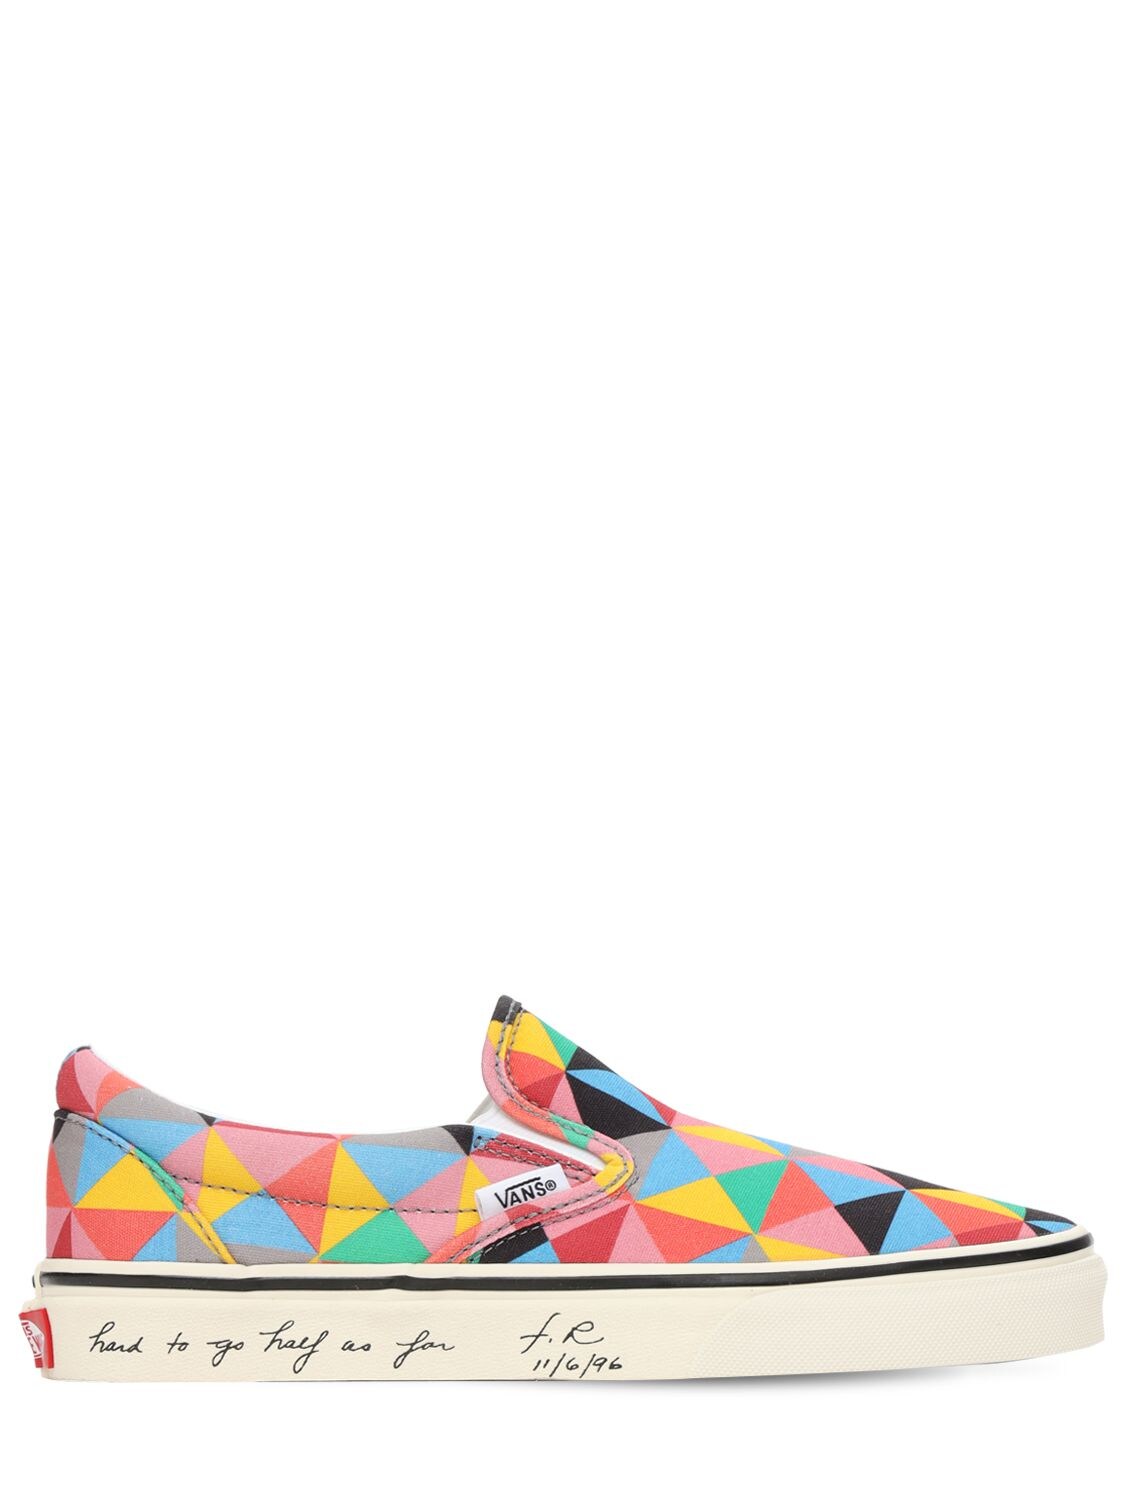 Image of Faith Ringgold Slip-on Sneakers